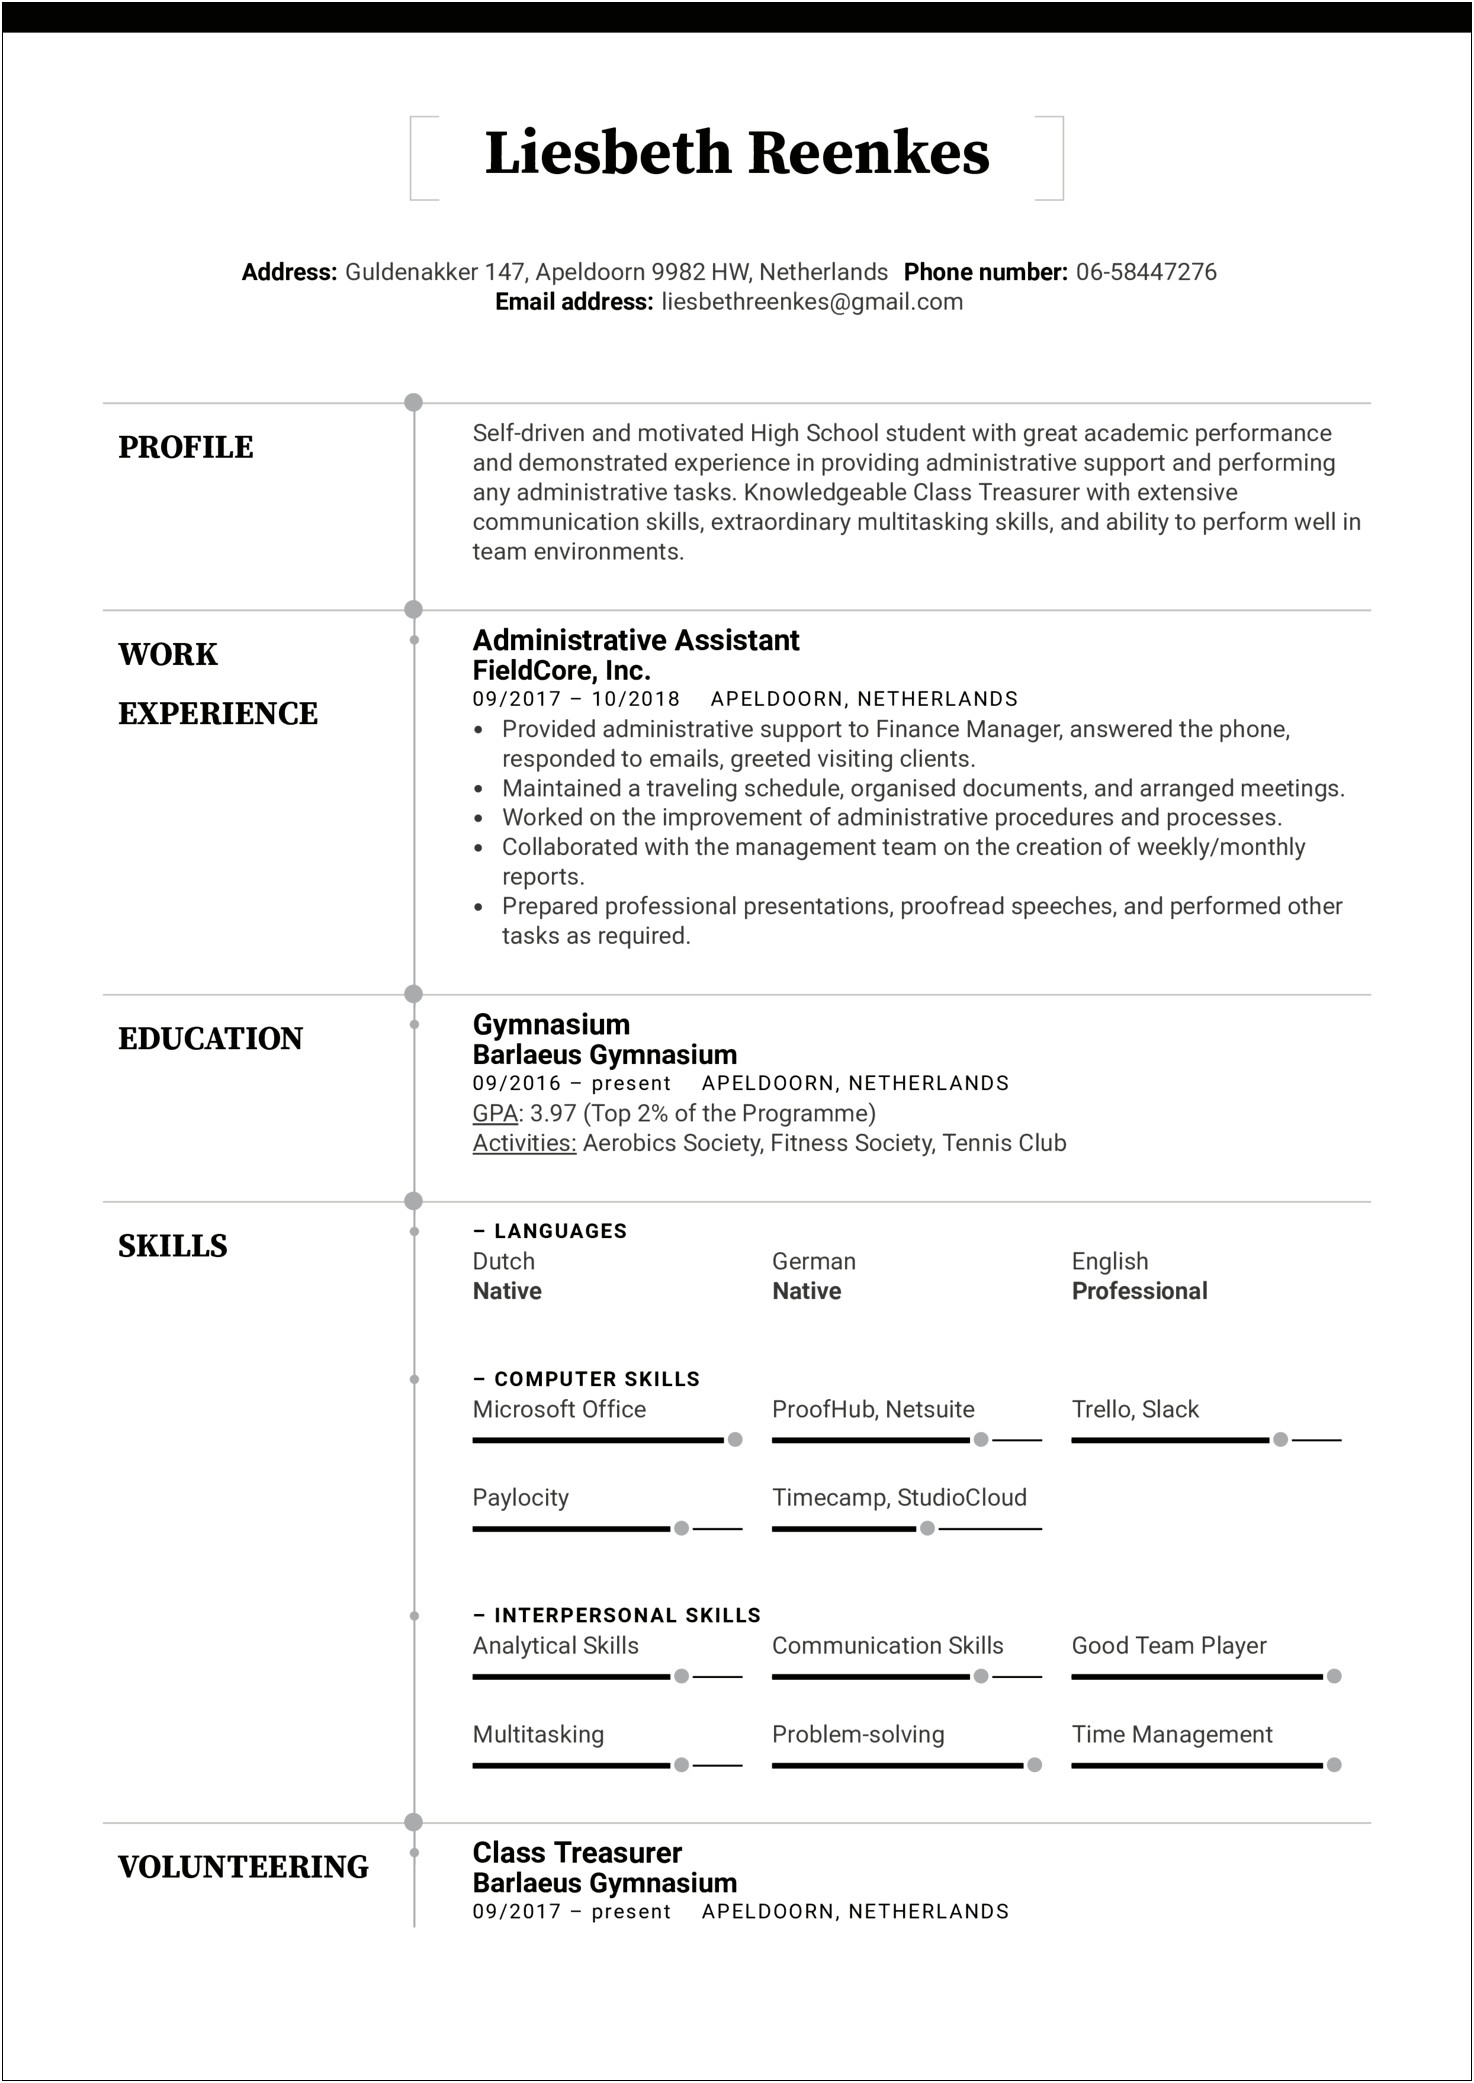 Resume Layout For High School Students